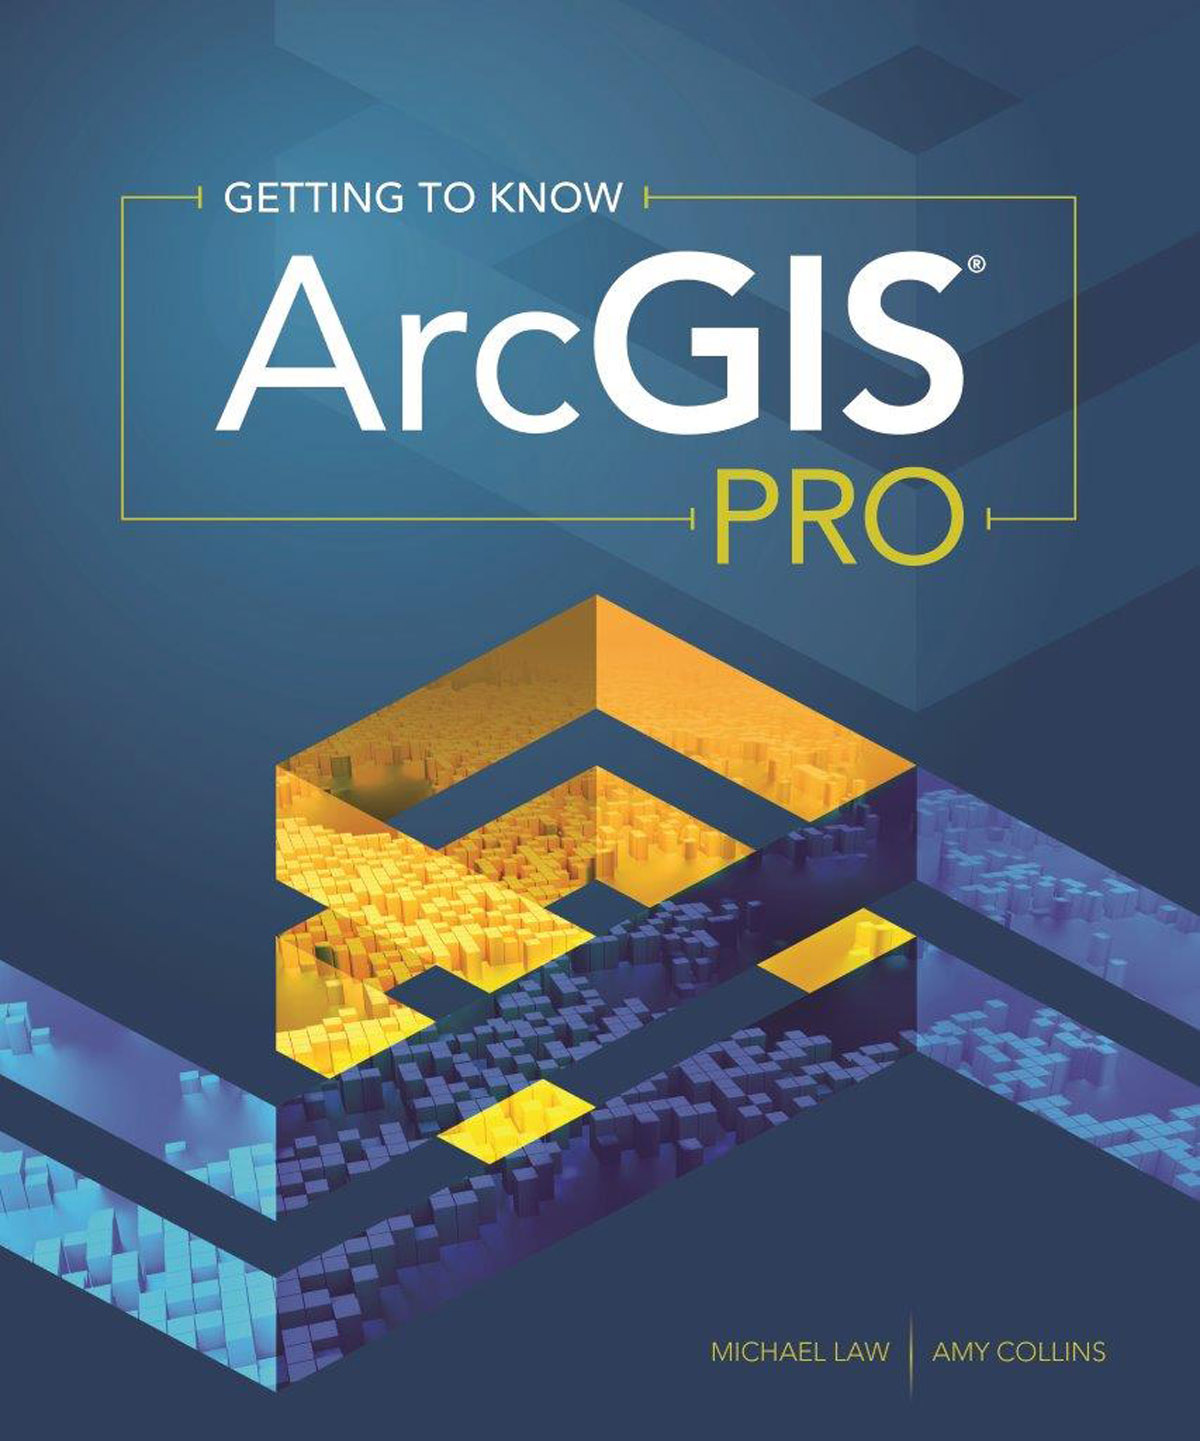 Esri Publishes the Workbook Getting to Know ArcGIS Pro